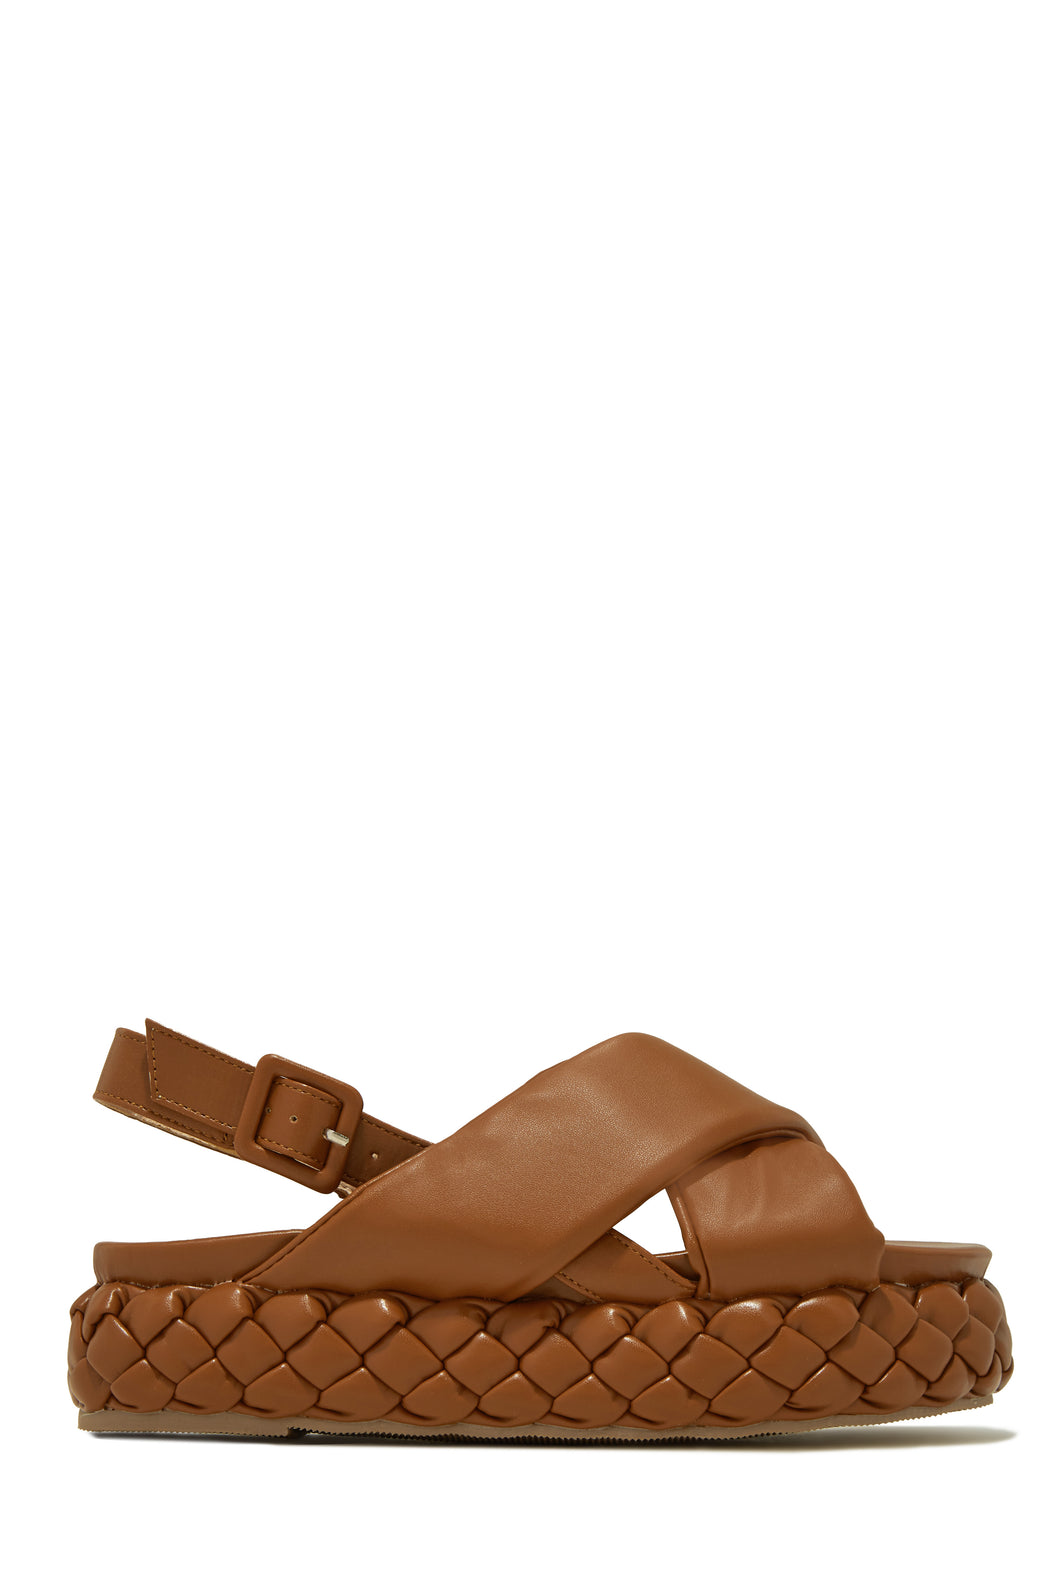 Vacation Ready Sandals